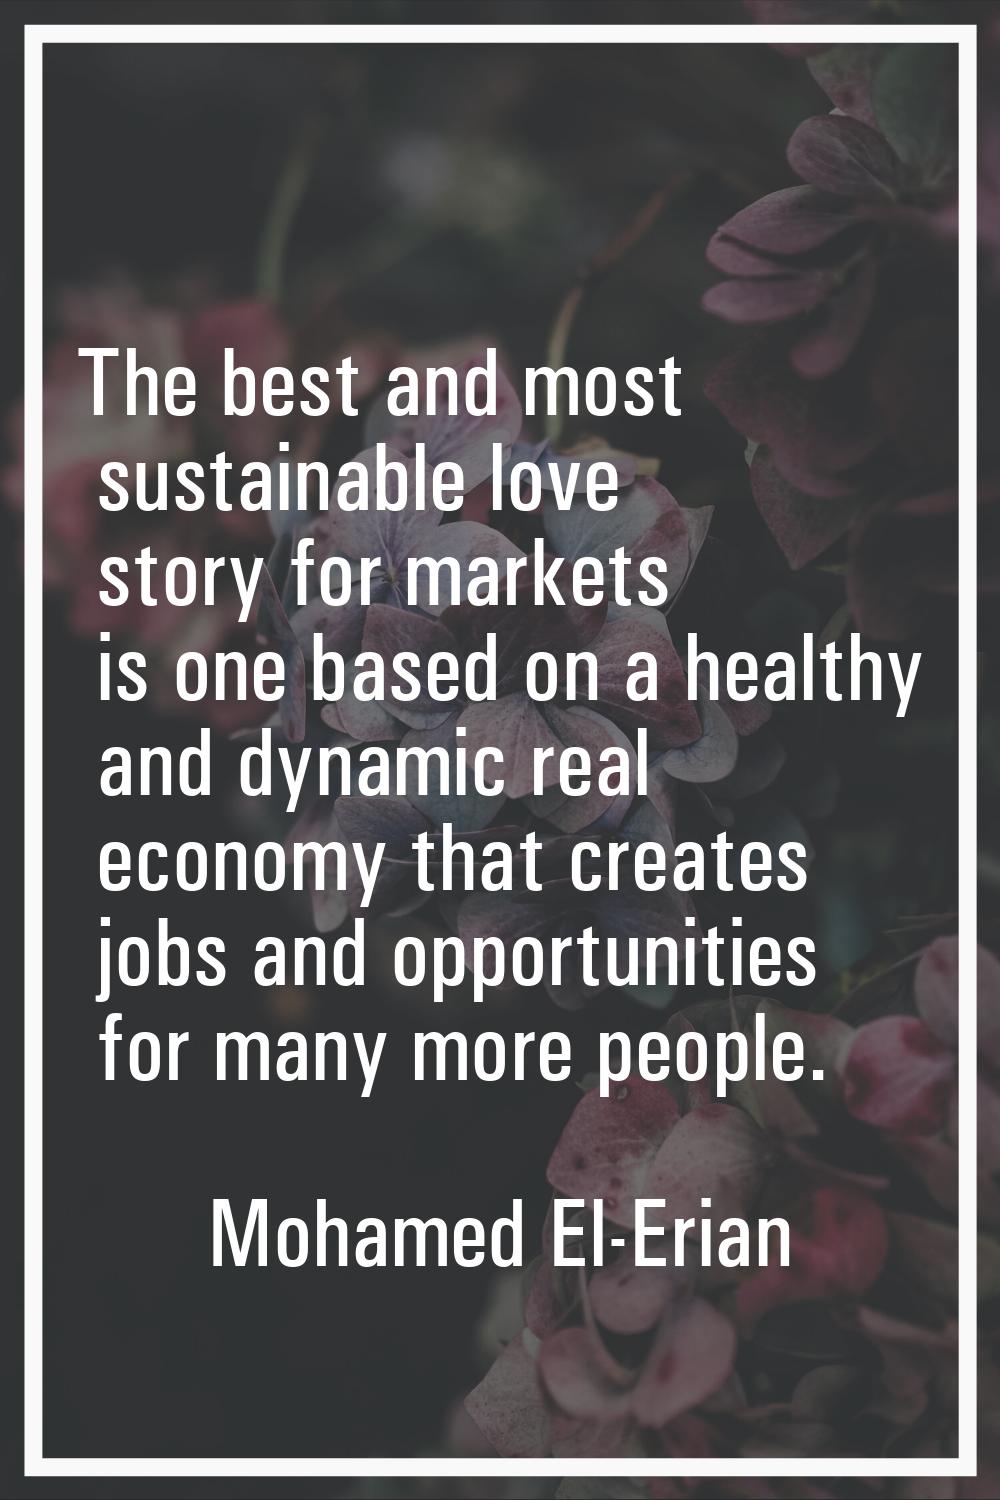 The best and most sustainable love story for markets is one based on a healthy and dynamic real eco